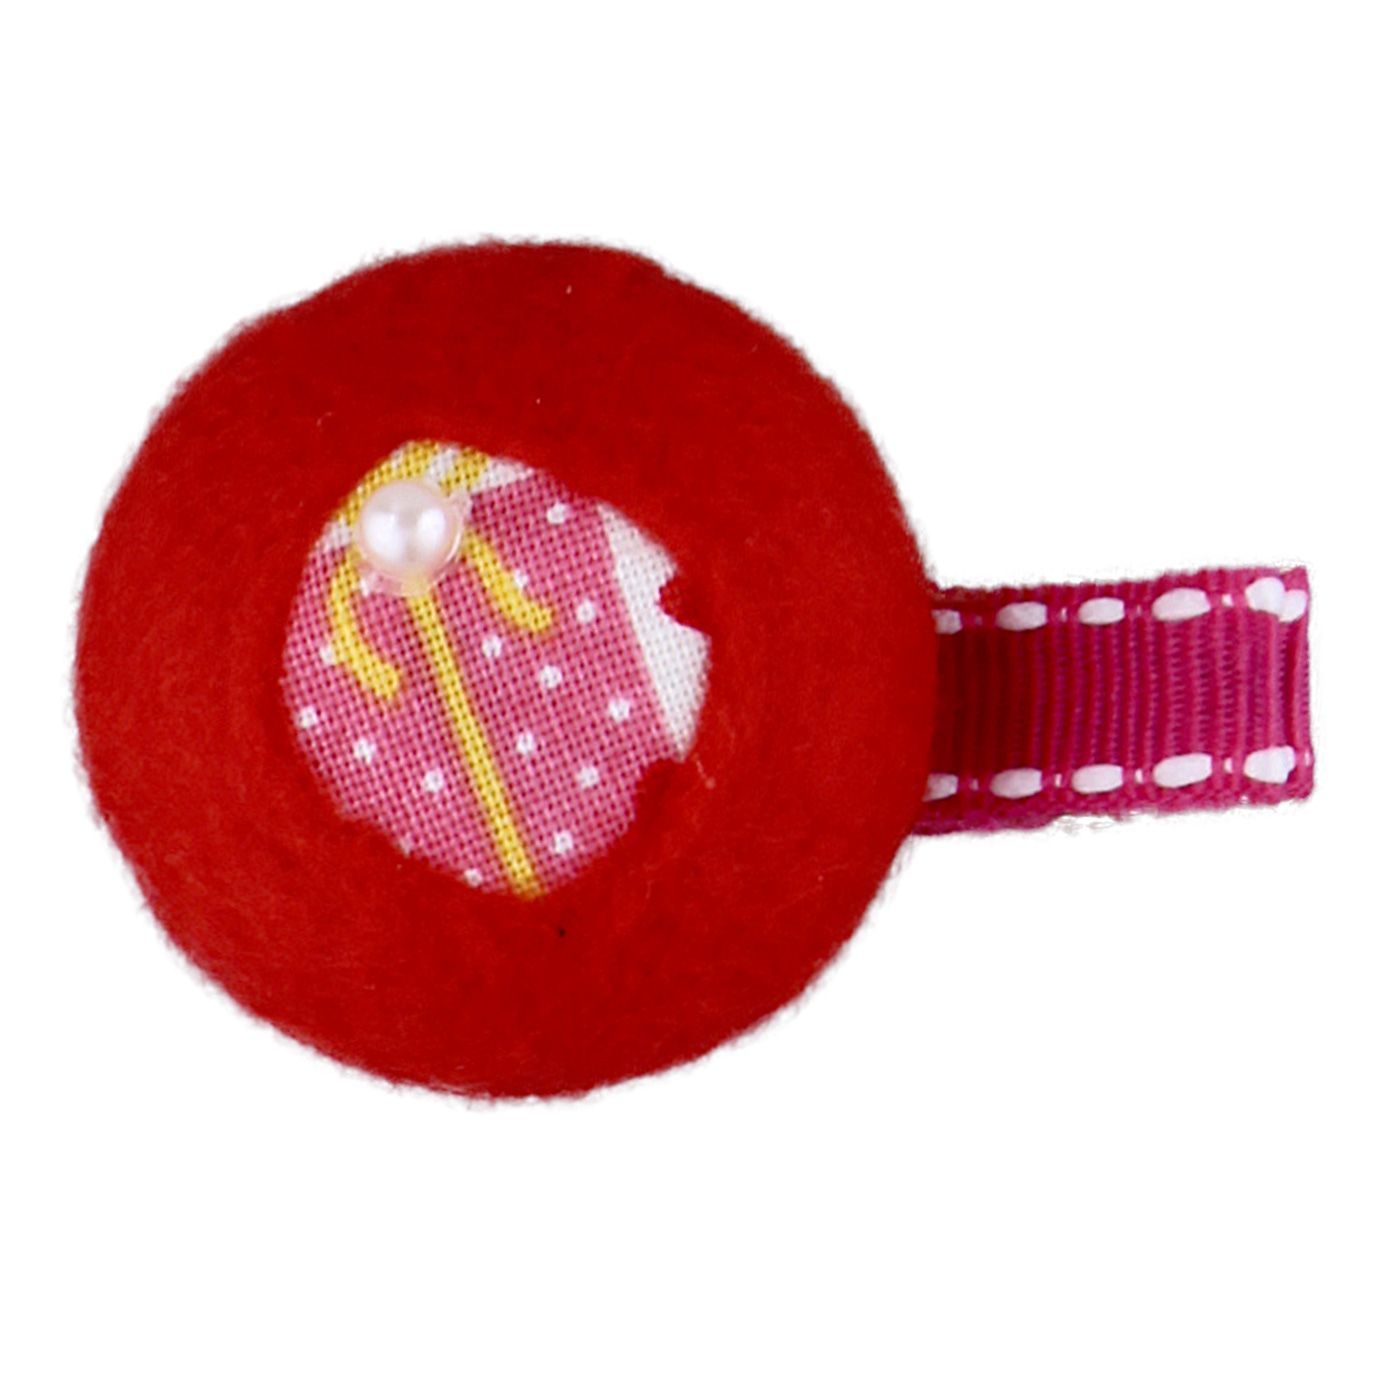 Bebecroc Semicircle Shape w/ Gift Print Clip Red - 2